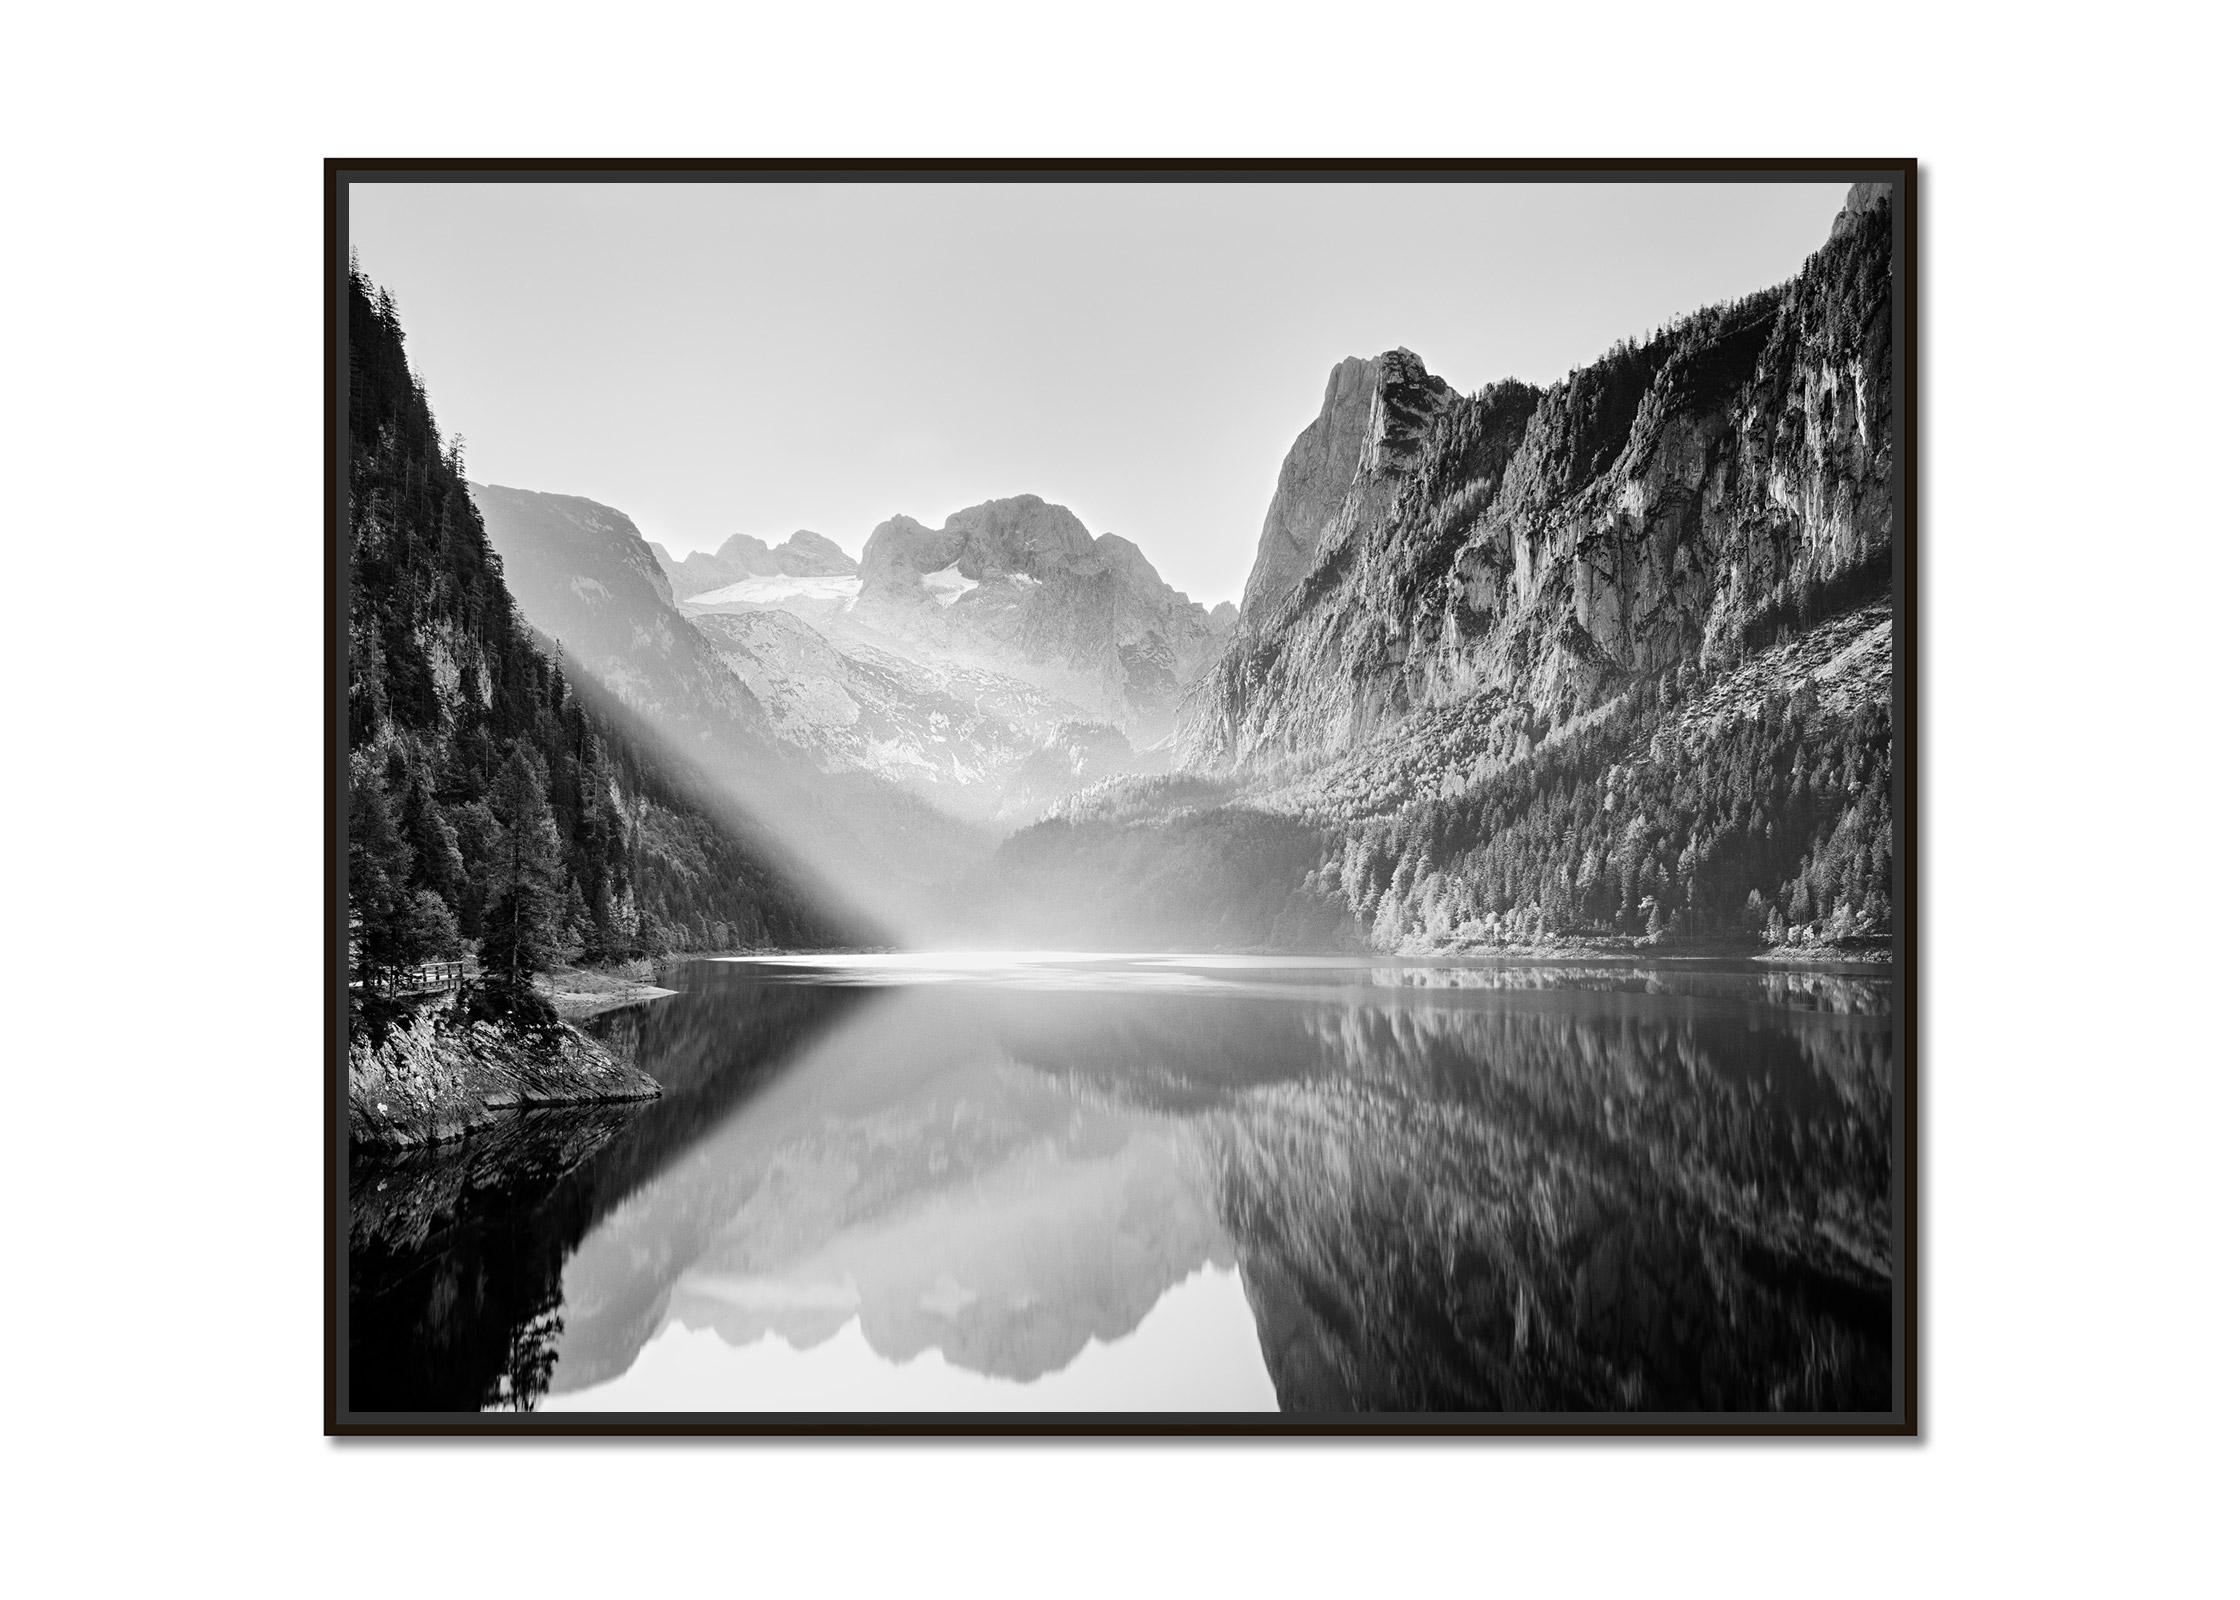 Illumination, mountain lake, black and white long exposure landscape photography - Photograph by Gerald Berghammer